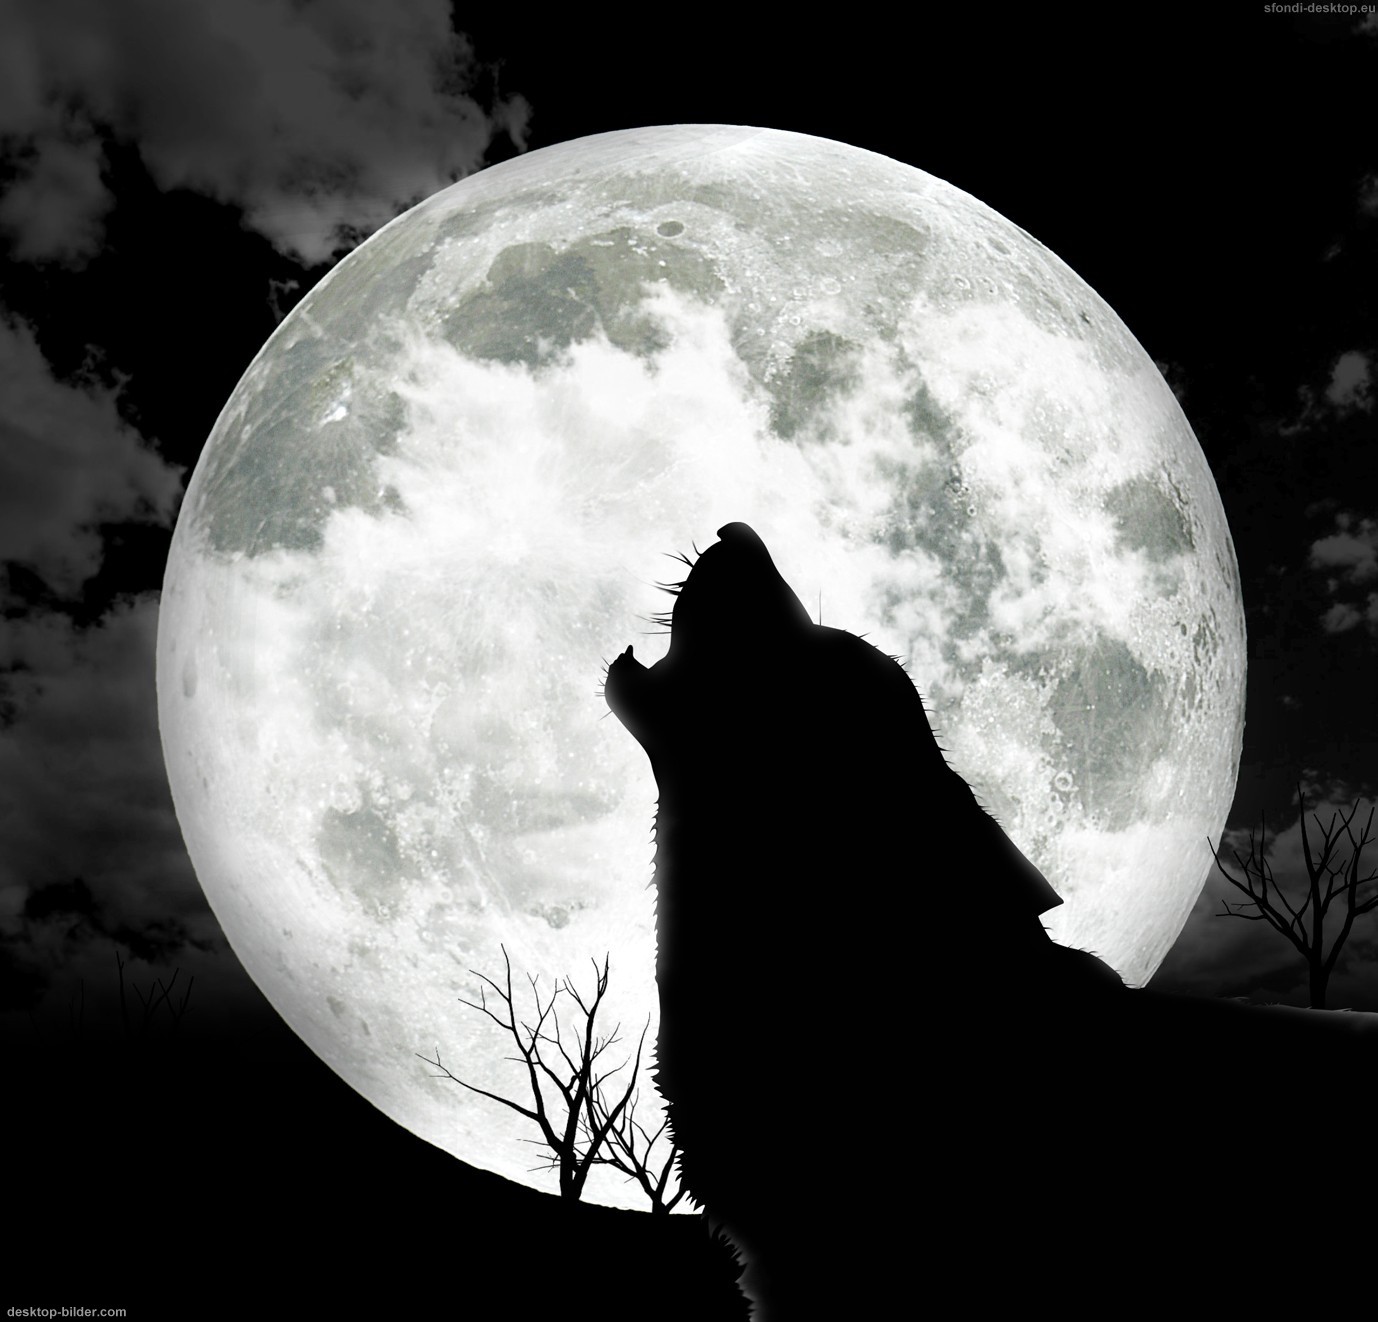 Similar Great HD Wolf Live Wallpaper Howling Photos